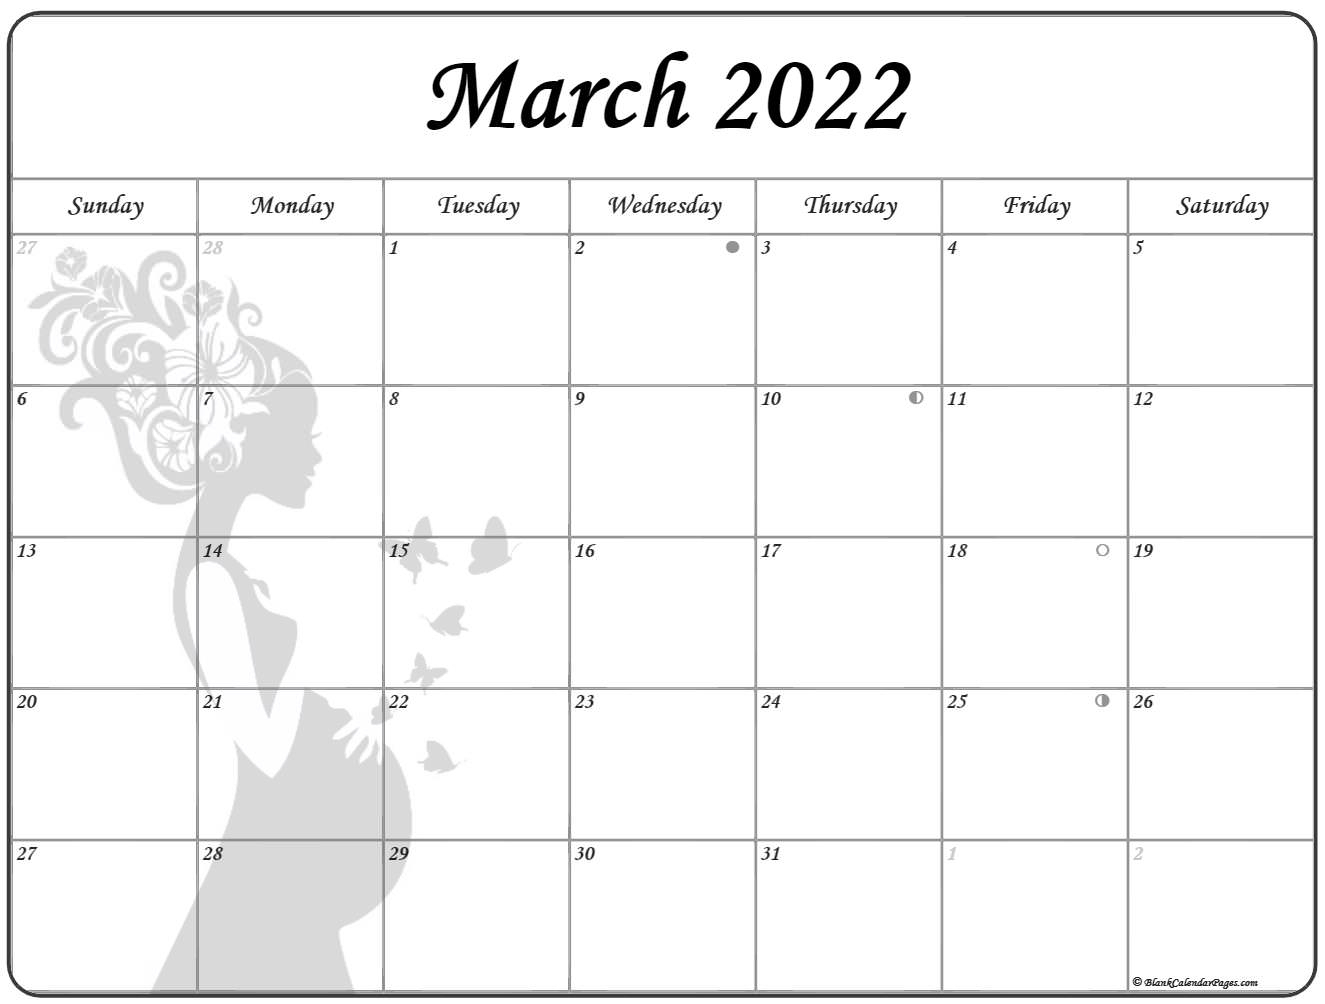 Collection Of March 2022 Photo Calendars With Image Filters